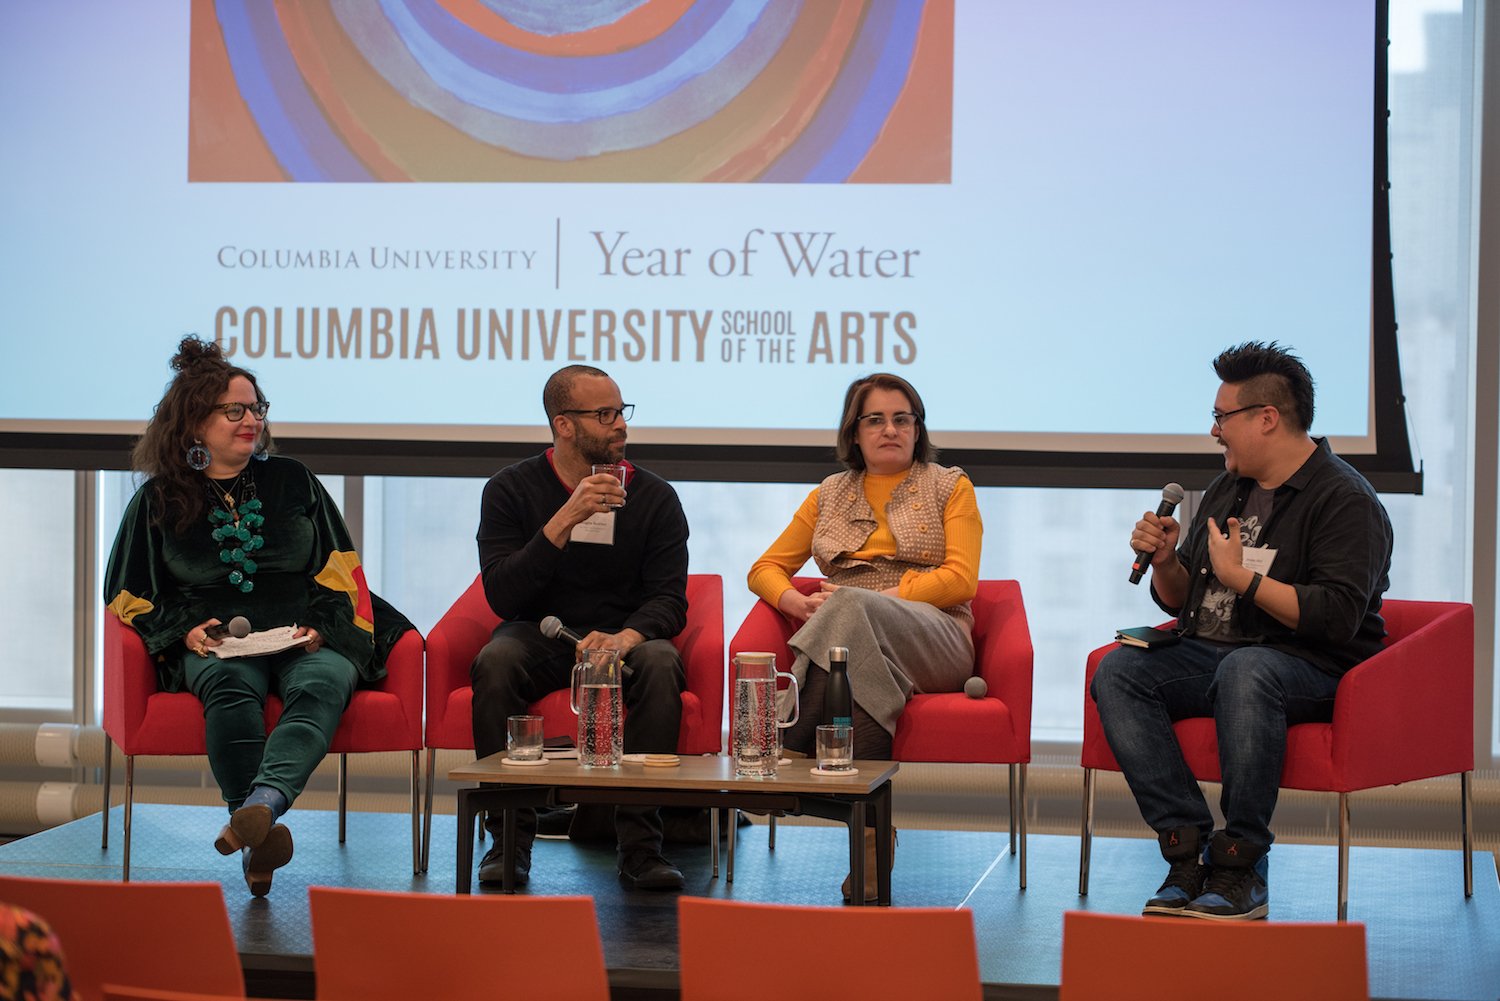  (Left to right): Dorothea Lasky, Douglas Kearney, Cecilia Pavón, and Jordan Abel discussing The Fluid Cycle of Electricity and Magic